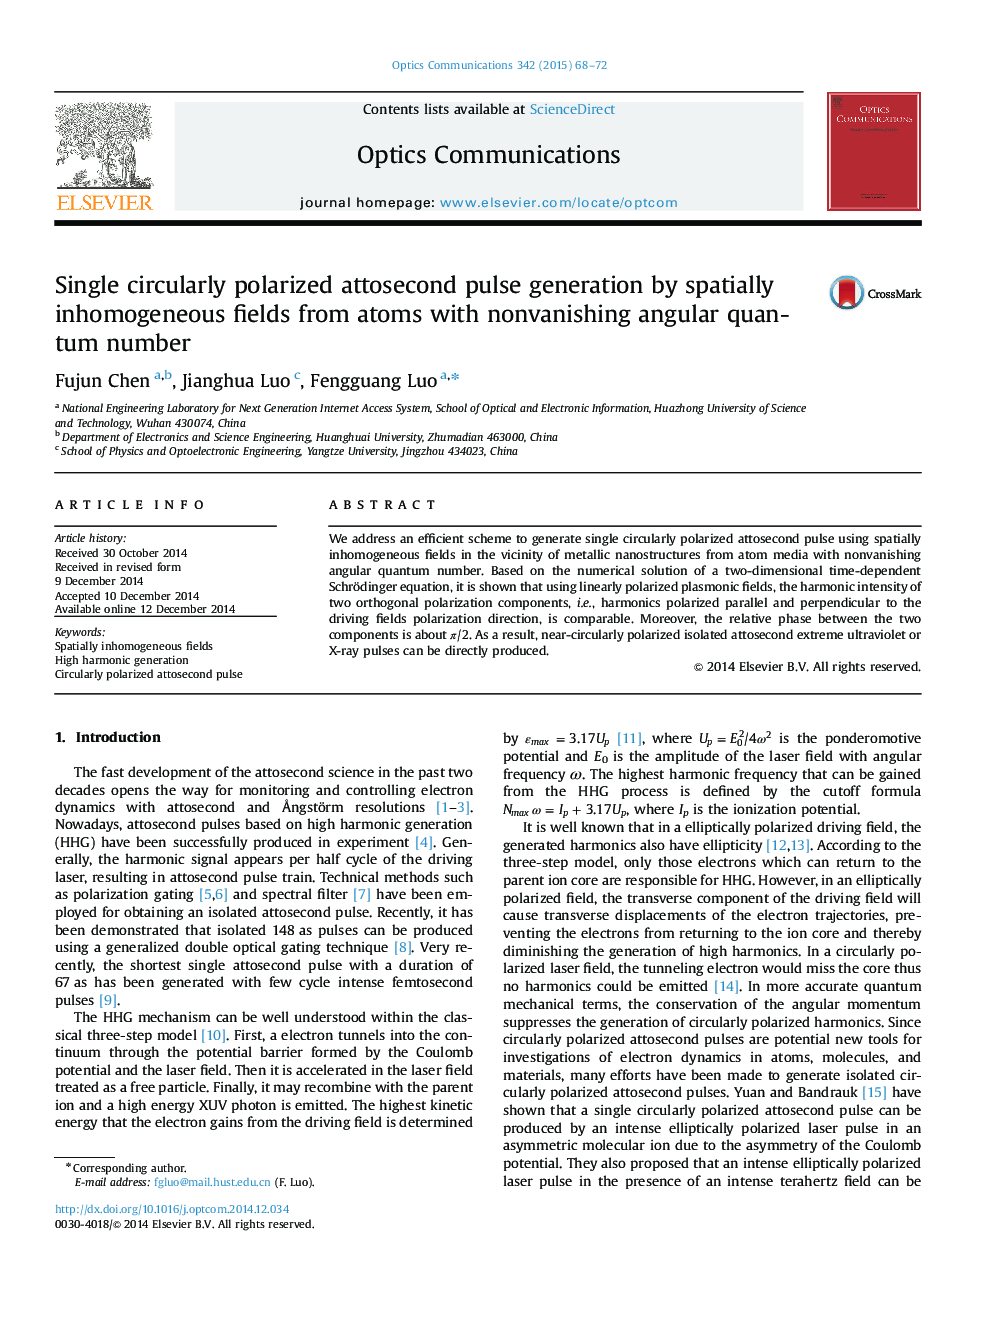 Single circularly polarized attosecond pulse generation by spatially inhomogeneous fields from atoms with nonvanishing angular quantum number